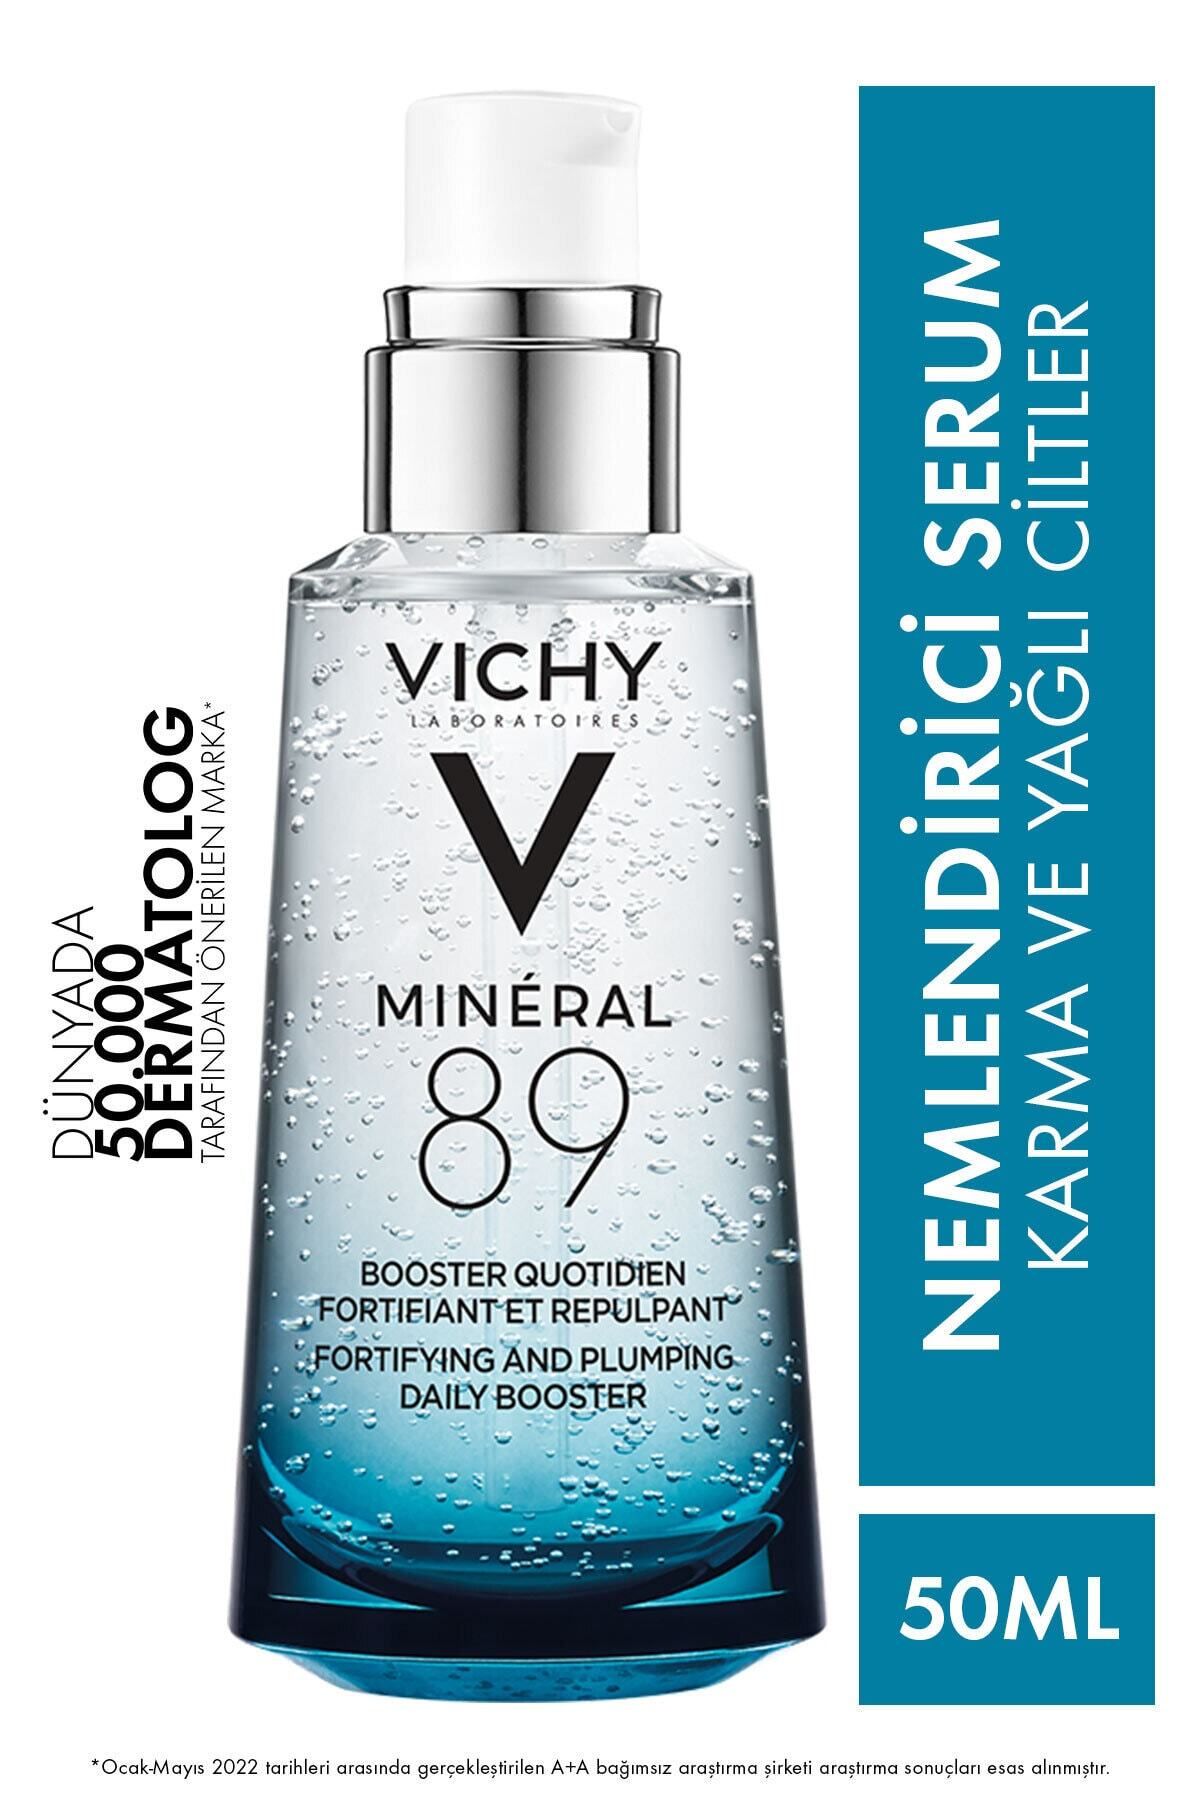 Vichy Moisturizing and Strengthening Serum with Mineral 89 Hyaluronic Acid 50Ml PSSNS375